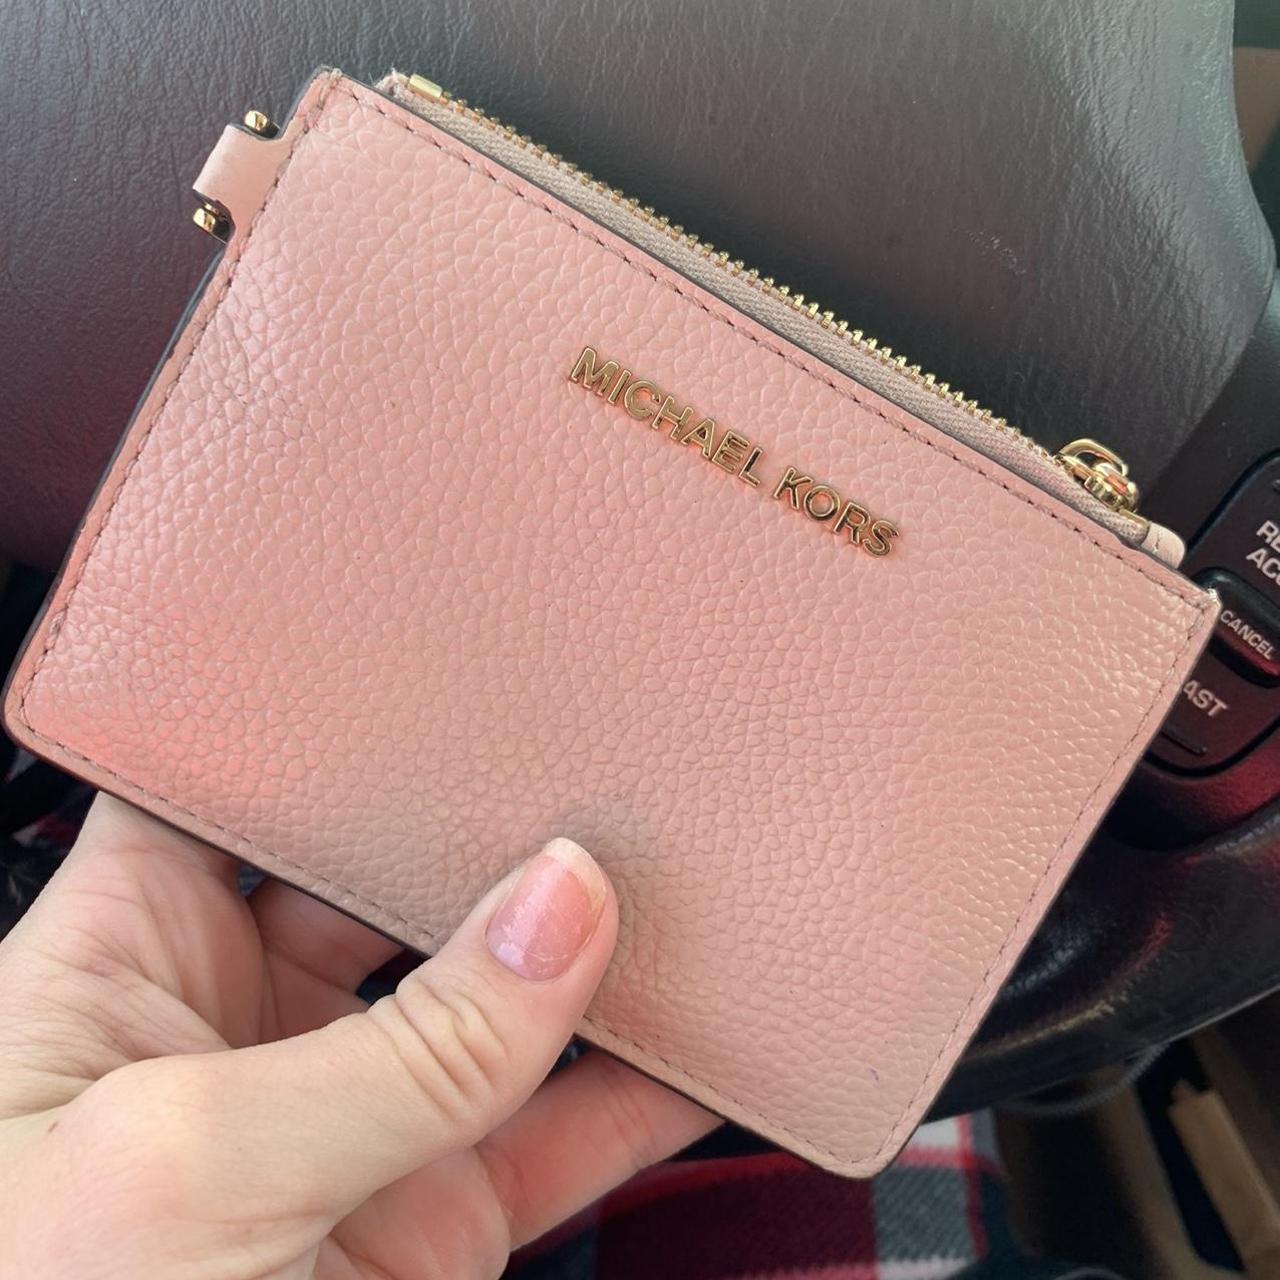 PINK MICHAEL KORS WALLET 💗💕, Great condition, used